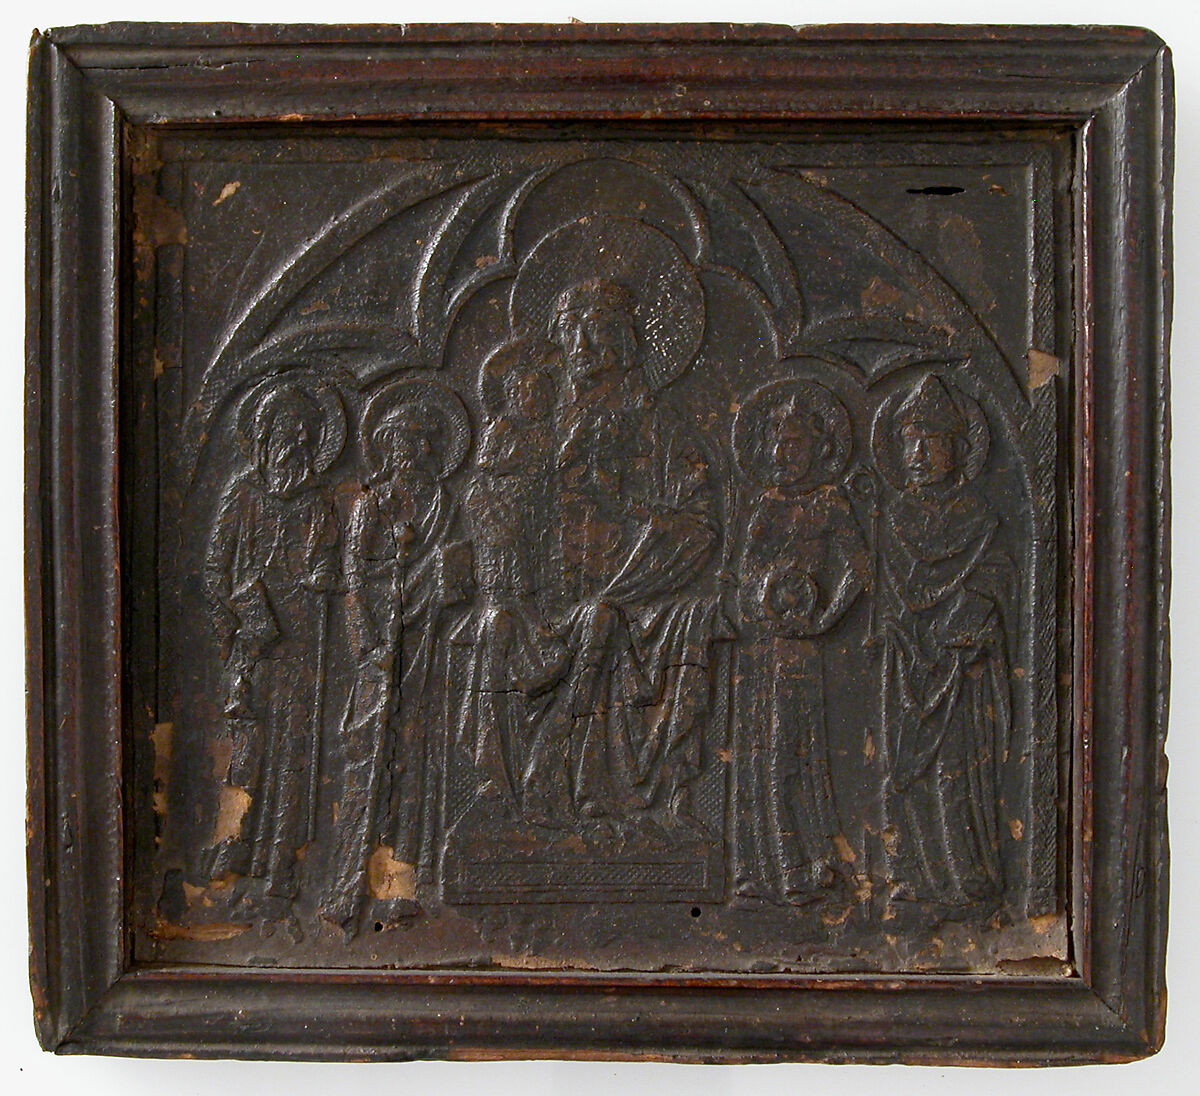 Relief of Virgin and Child, Paste relief, tooled leather, wood frame and back, Italian 